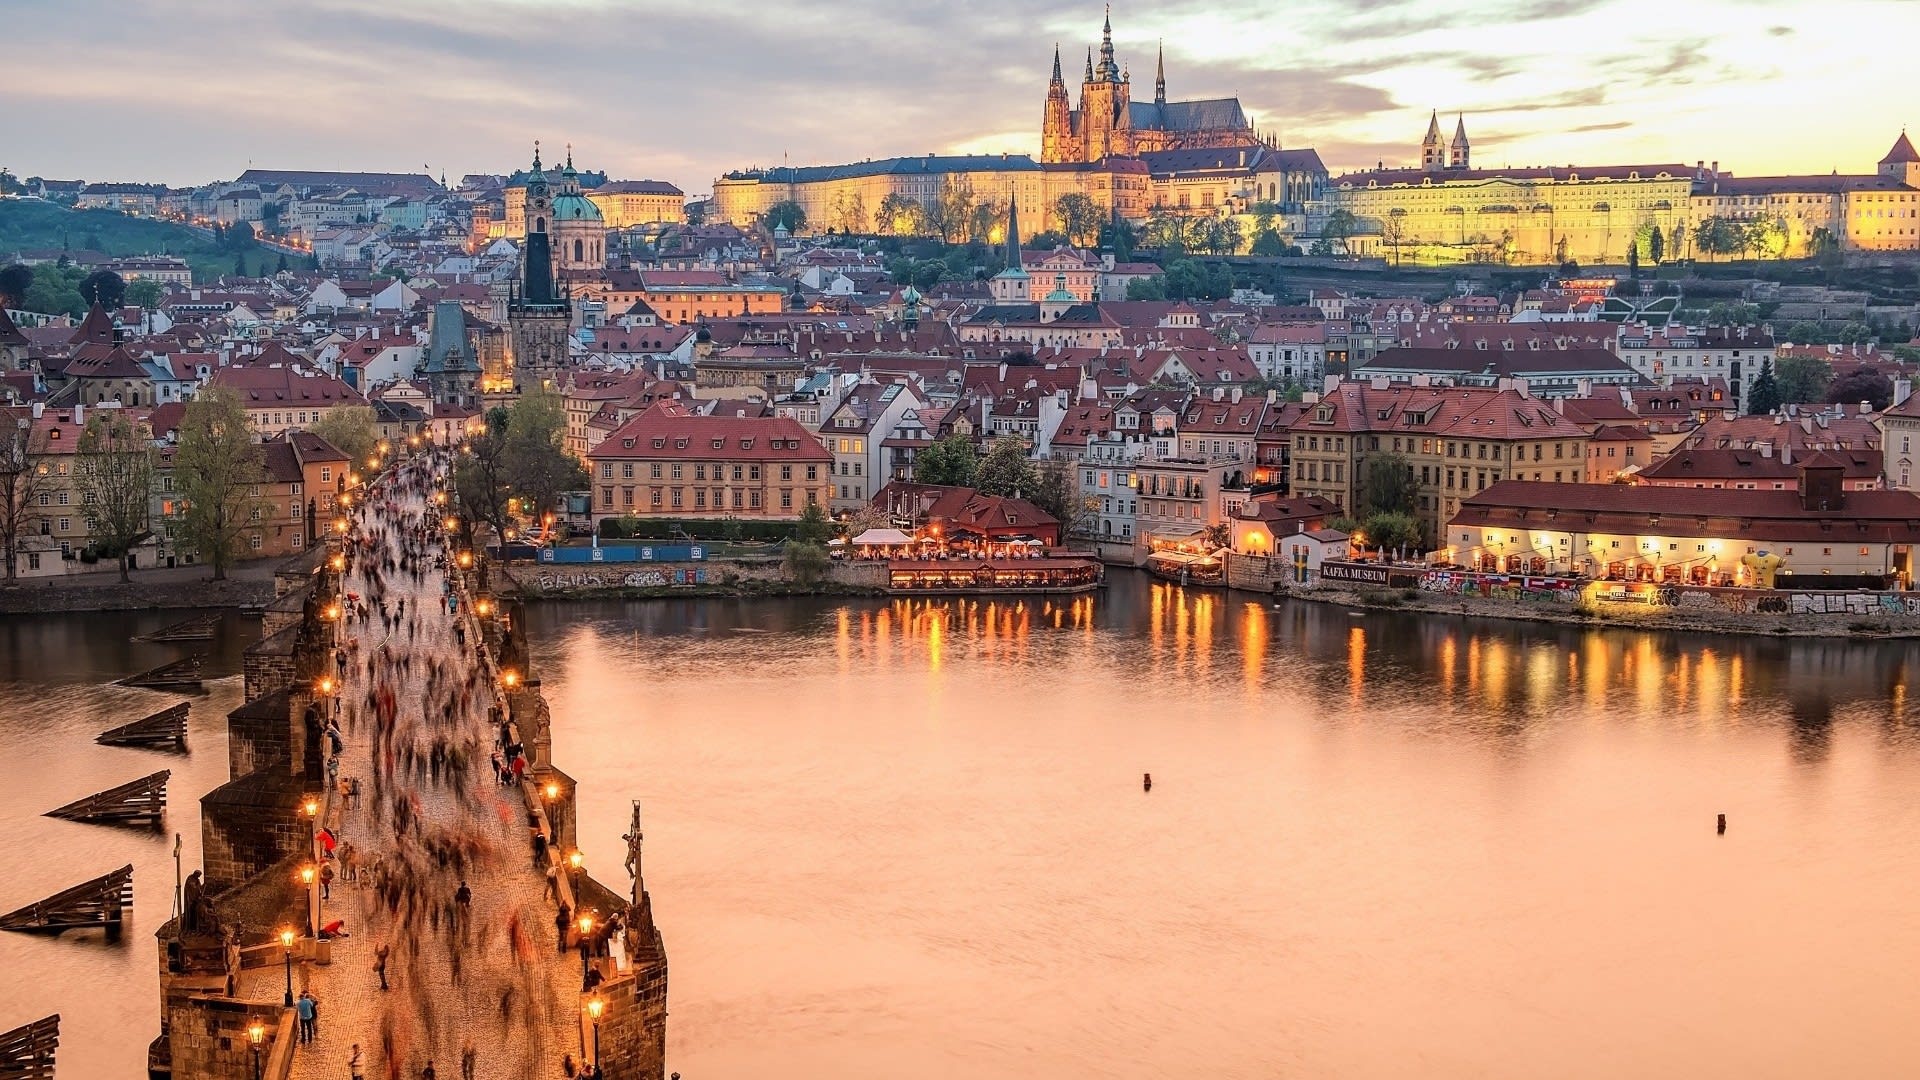 Prague: The city is ranked sixth in the Tripadvisor world list of the best destinations in 2016. 1920x1080 Full HD Wallpaper.